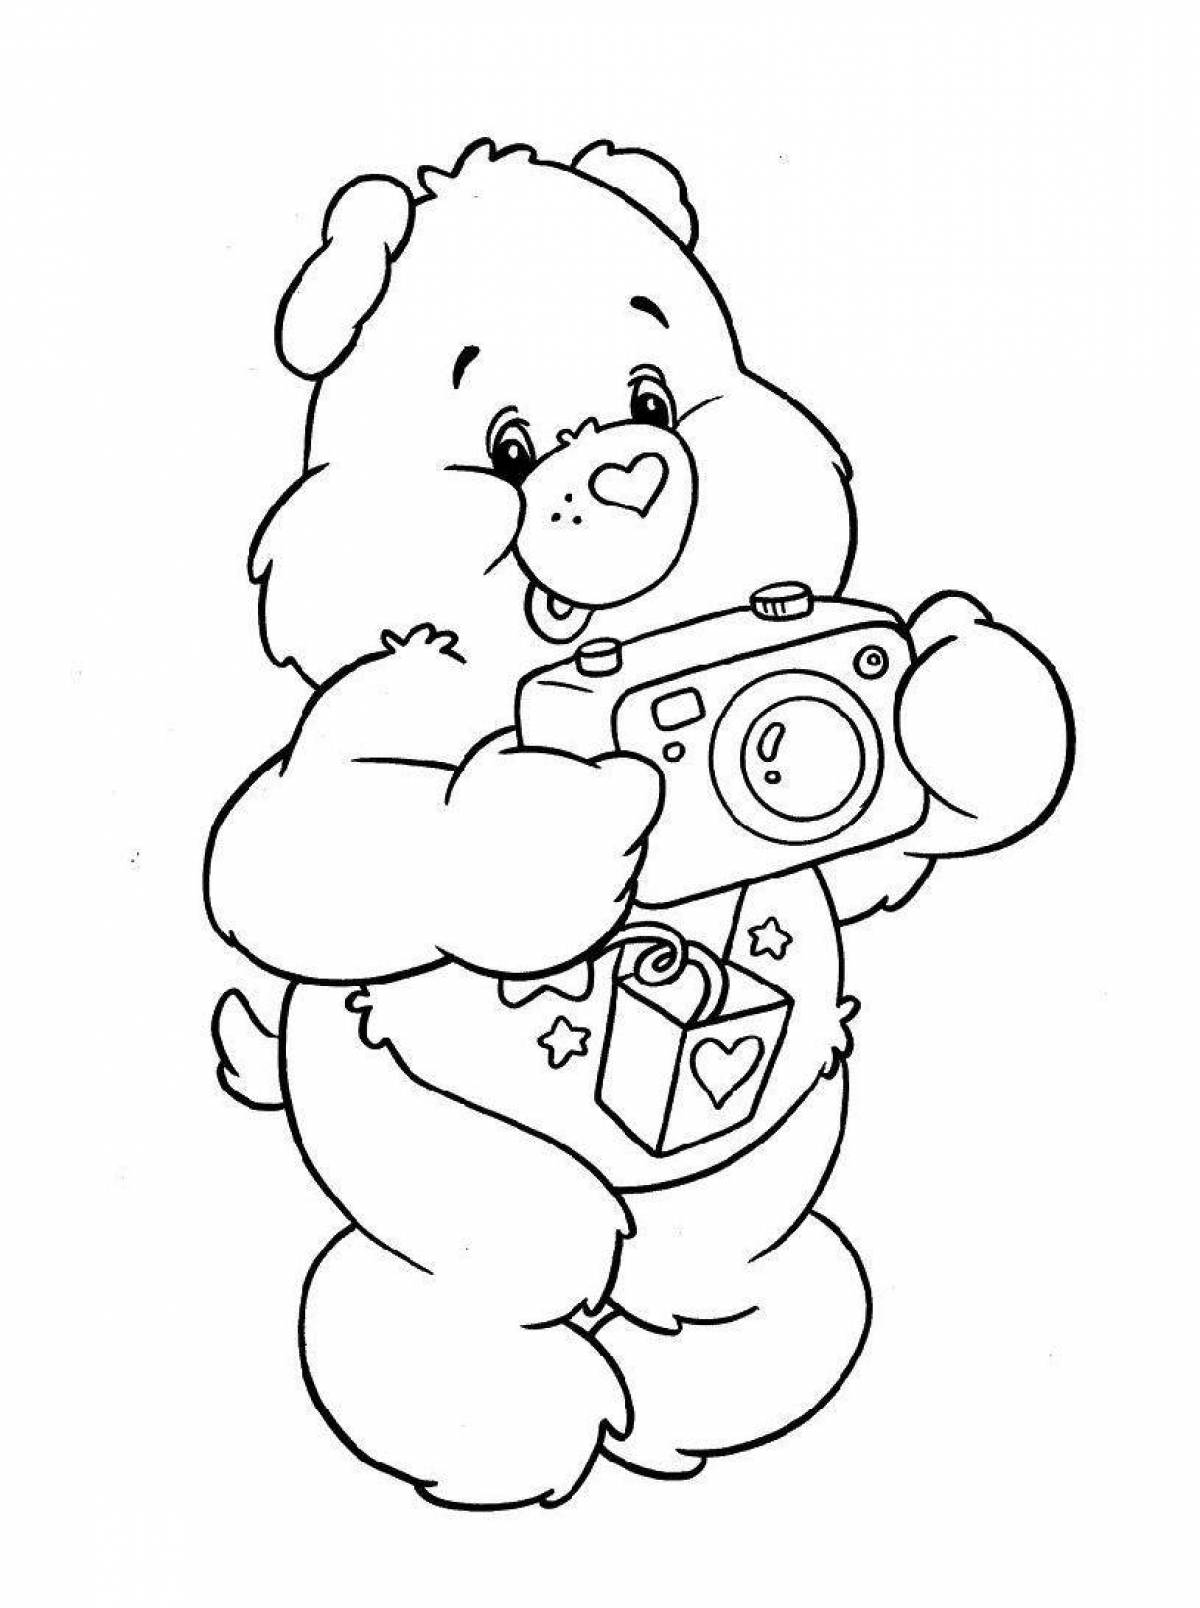 Colorful super bear coloring page